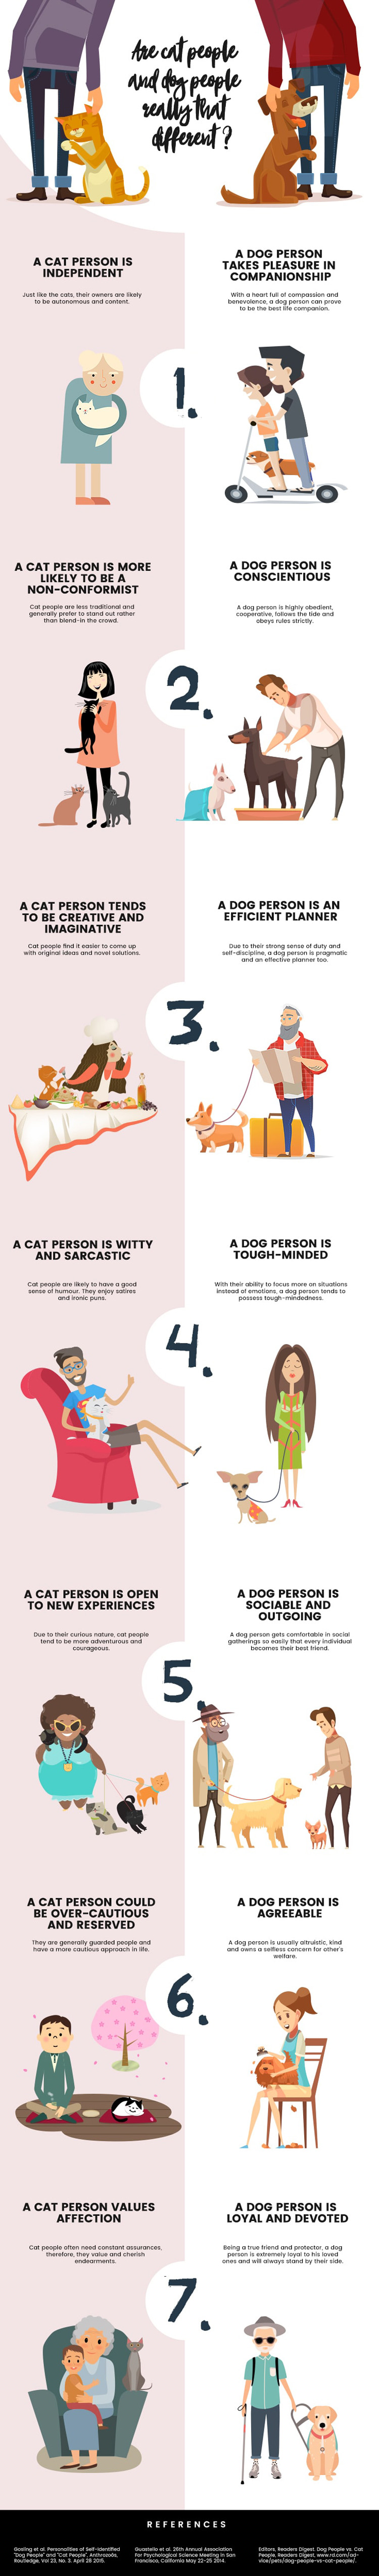 Are You a Cat Person or a Dog Person?